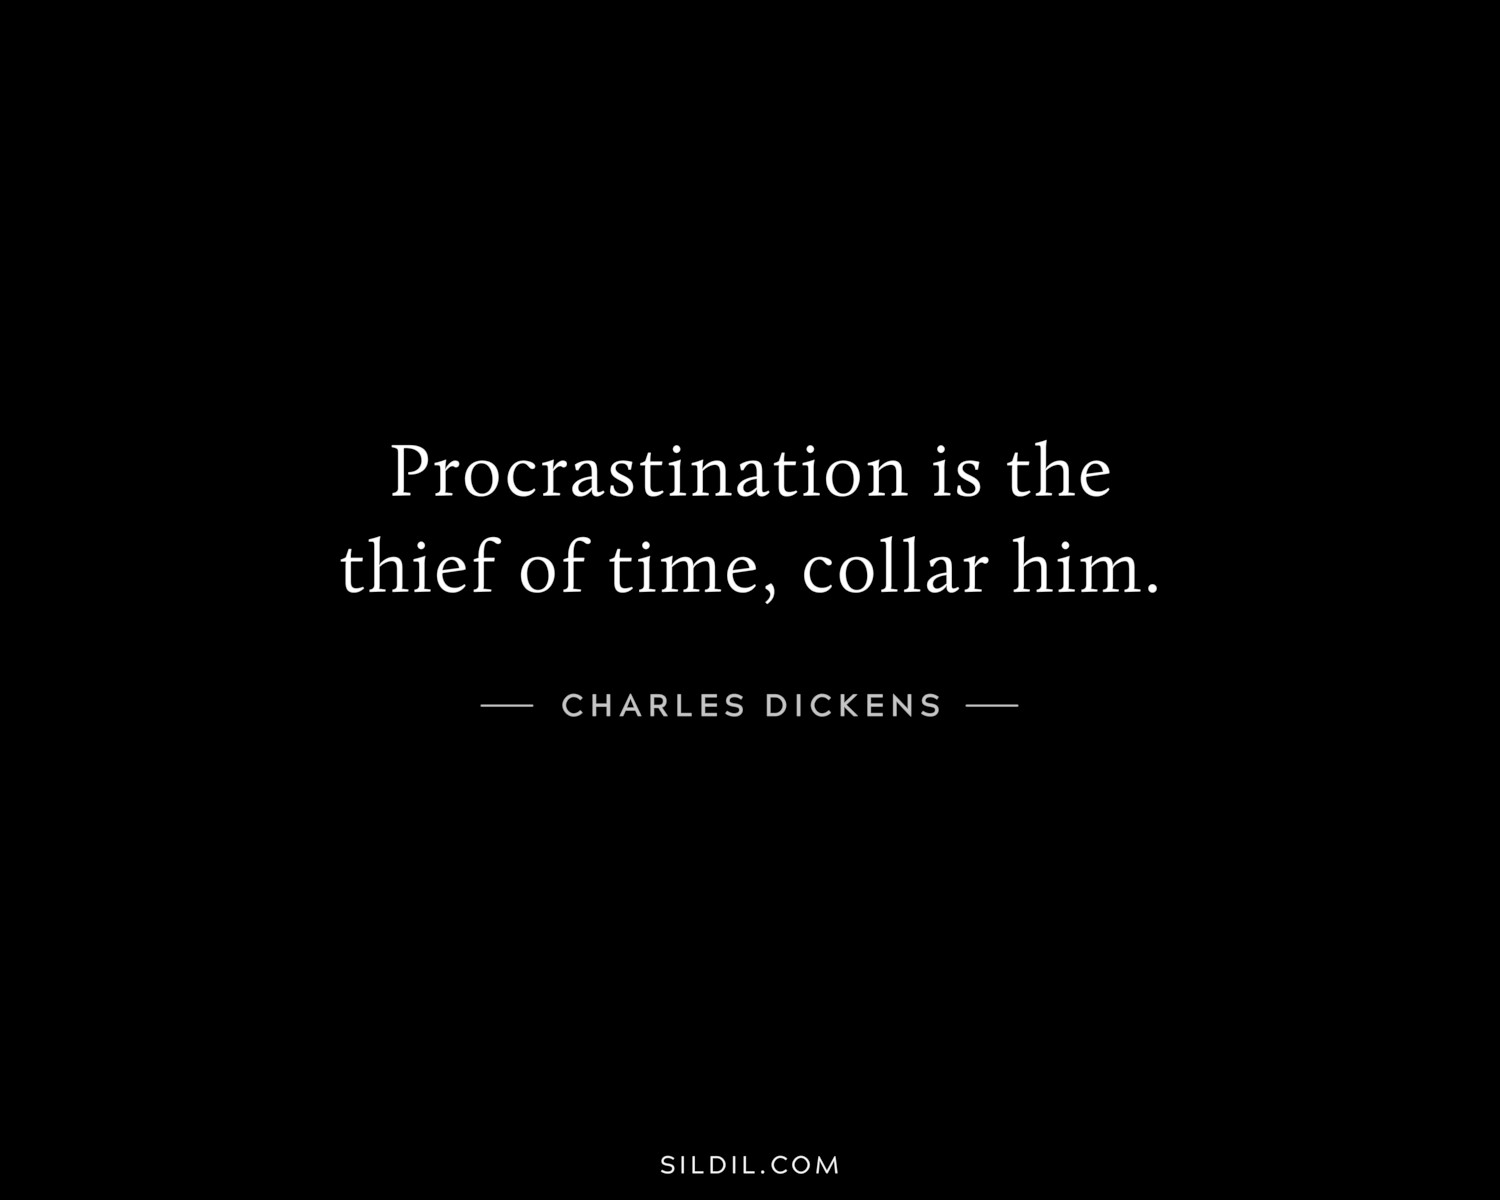 Procrastination is the thief of time, collar him.